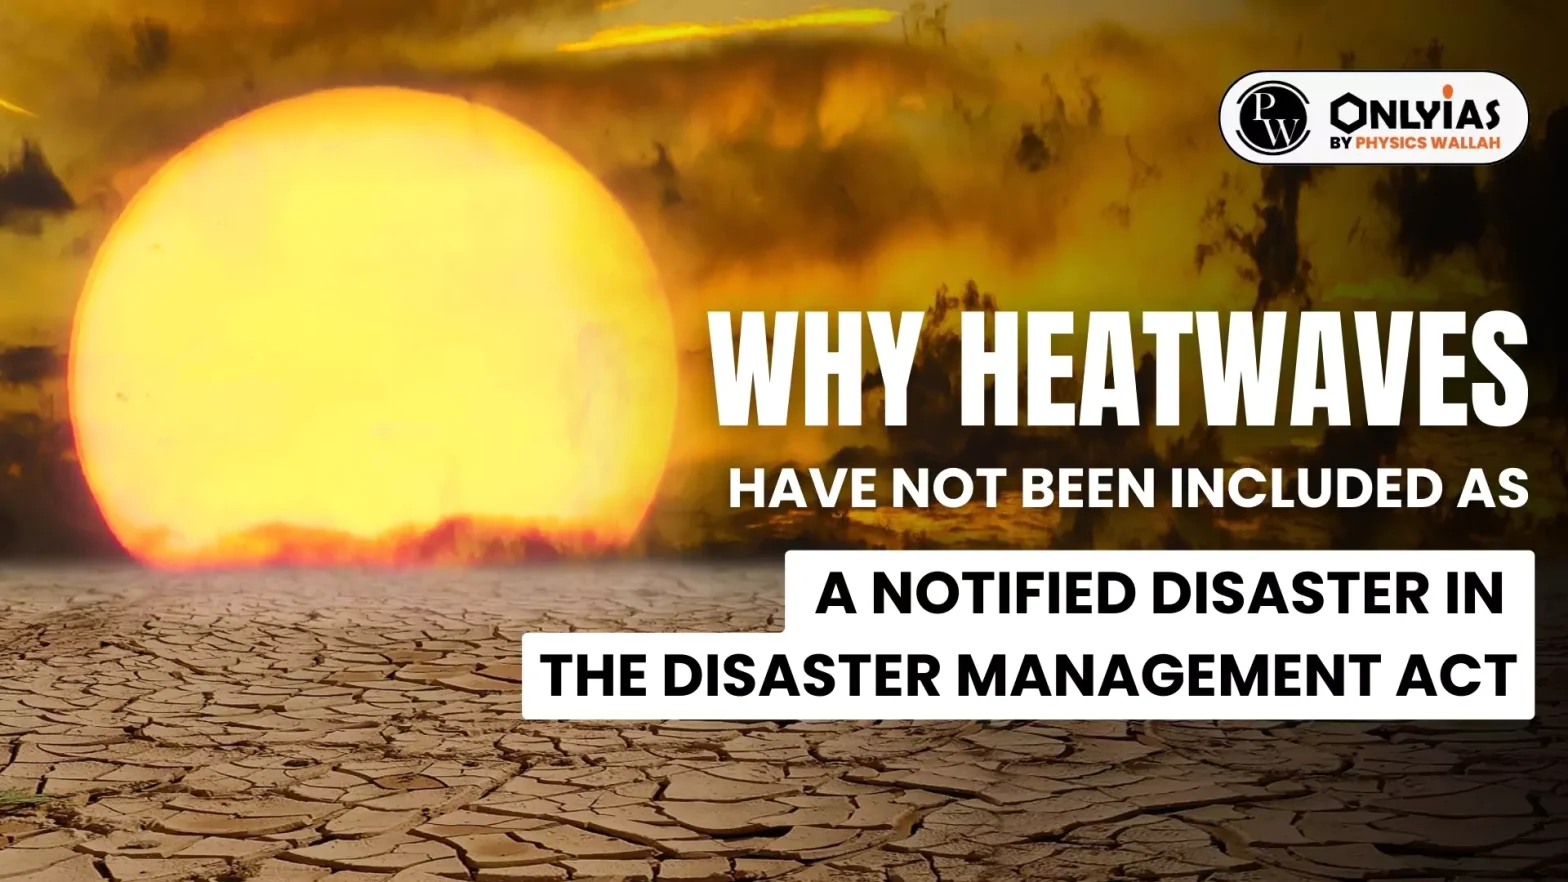 Why Heatwaves have not been included as a Notified Disaster in the Disaster Management Act